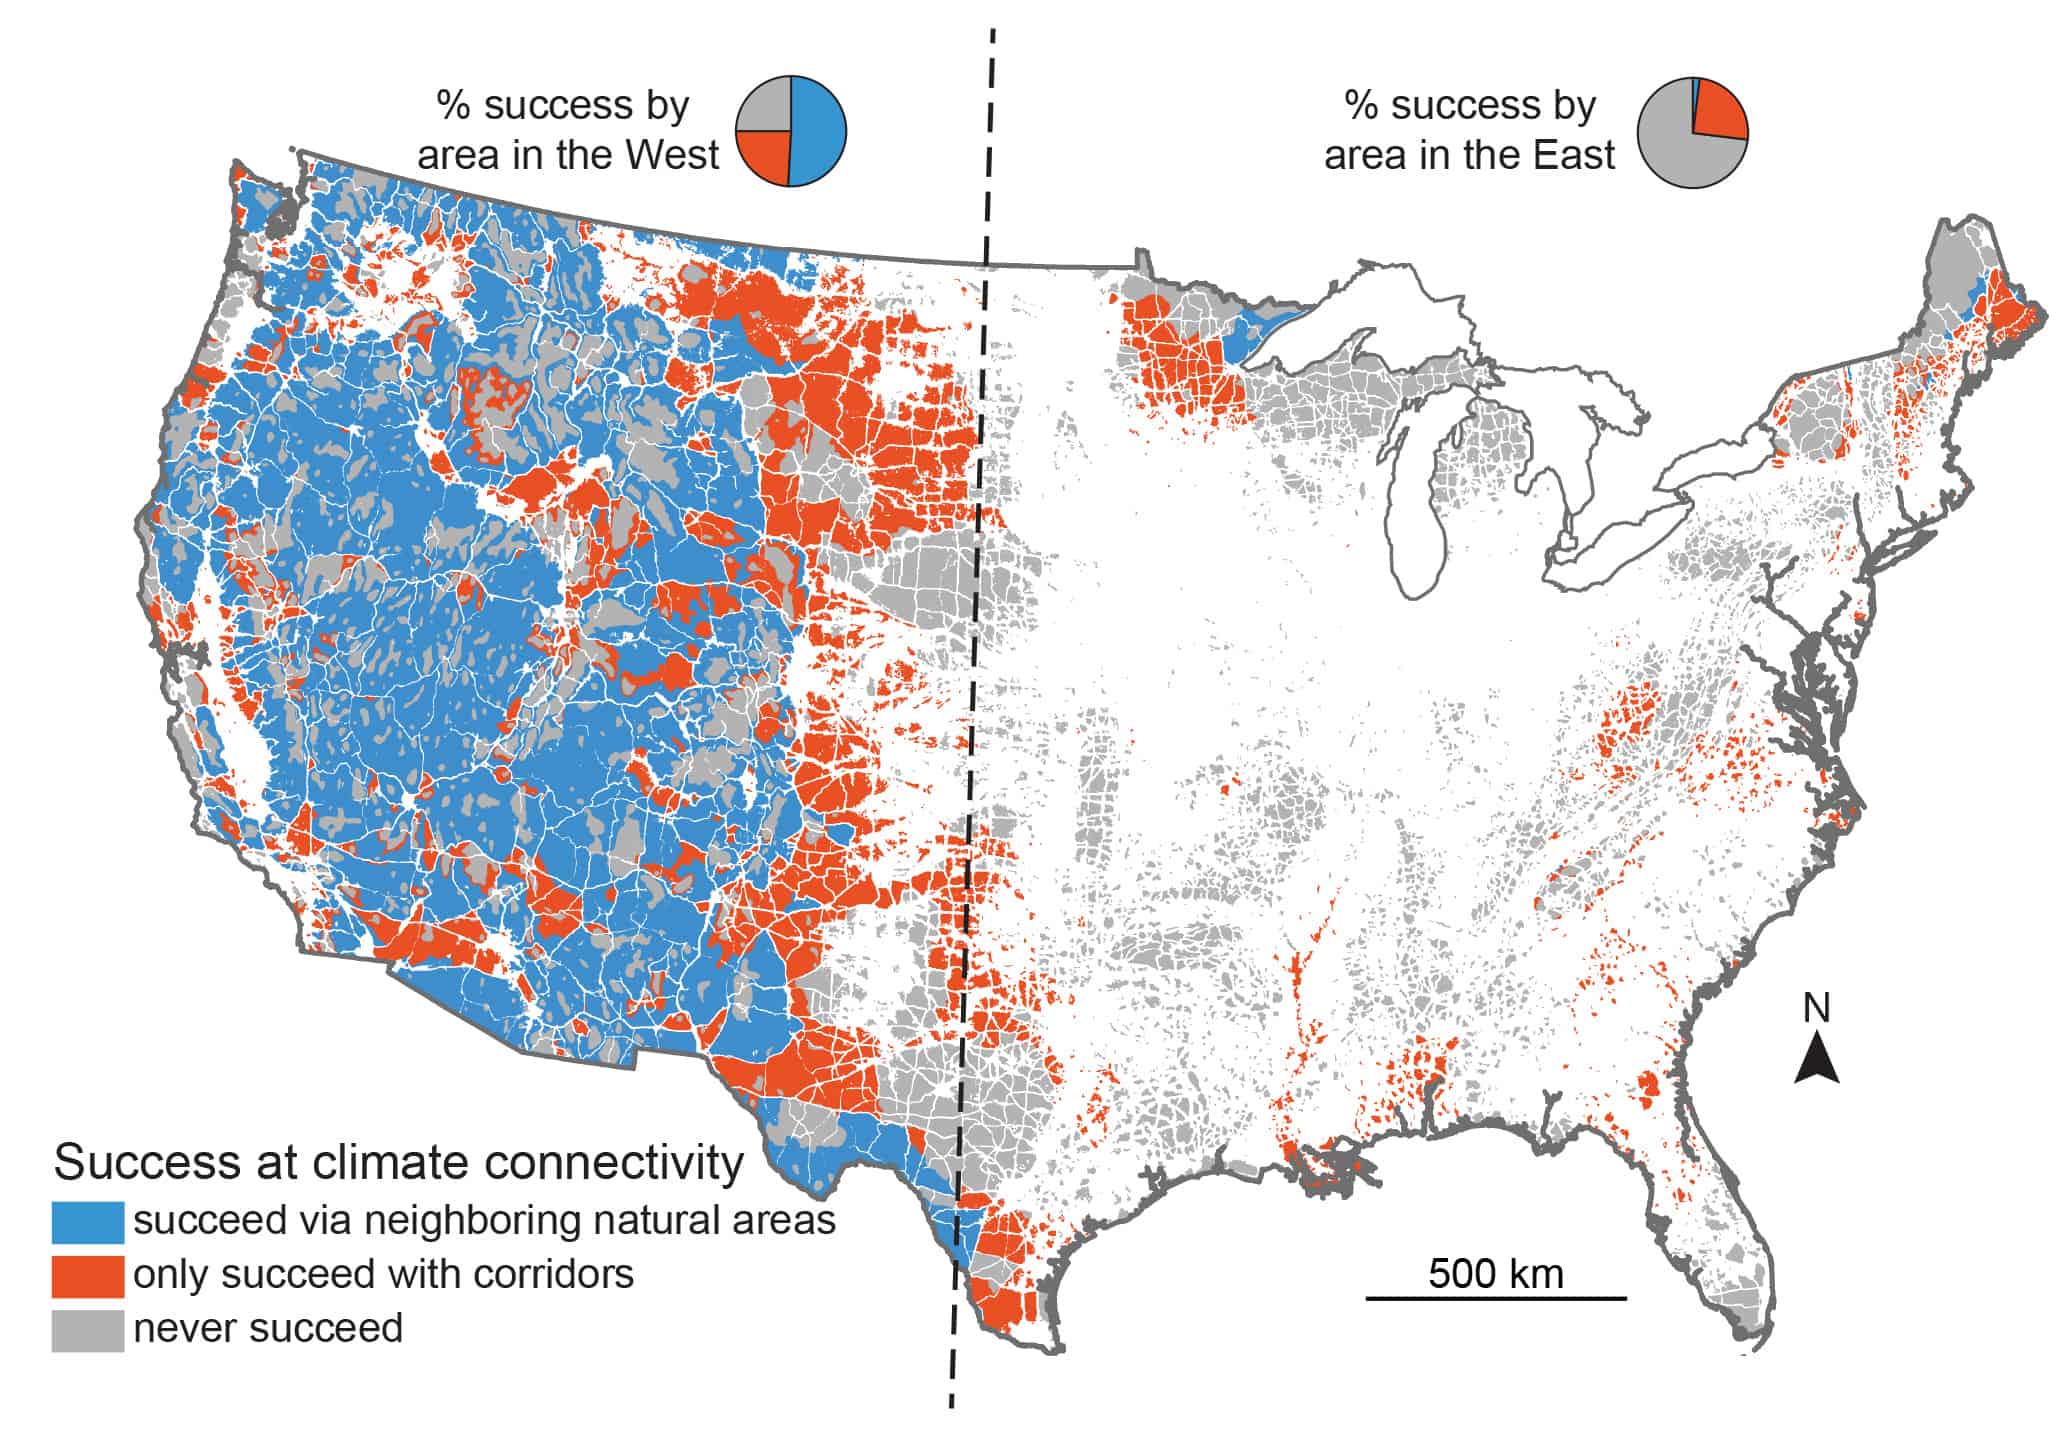 This map shows the regions of the U.S. where plants and animals could potentially evade predicted climate change. Blue areas show where they will be able to adapt to climate impacts given current conditions, orange areas are where they will be able to succeed only if they are able to cross over human disturbed areas, and grey areas are areas where they cannot succeed by following climate gradients. ©Jenny McGuire, Georgia Tech 